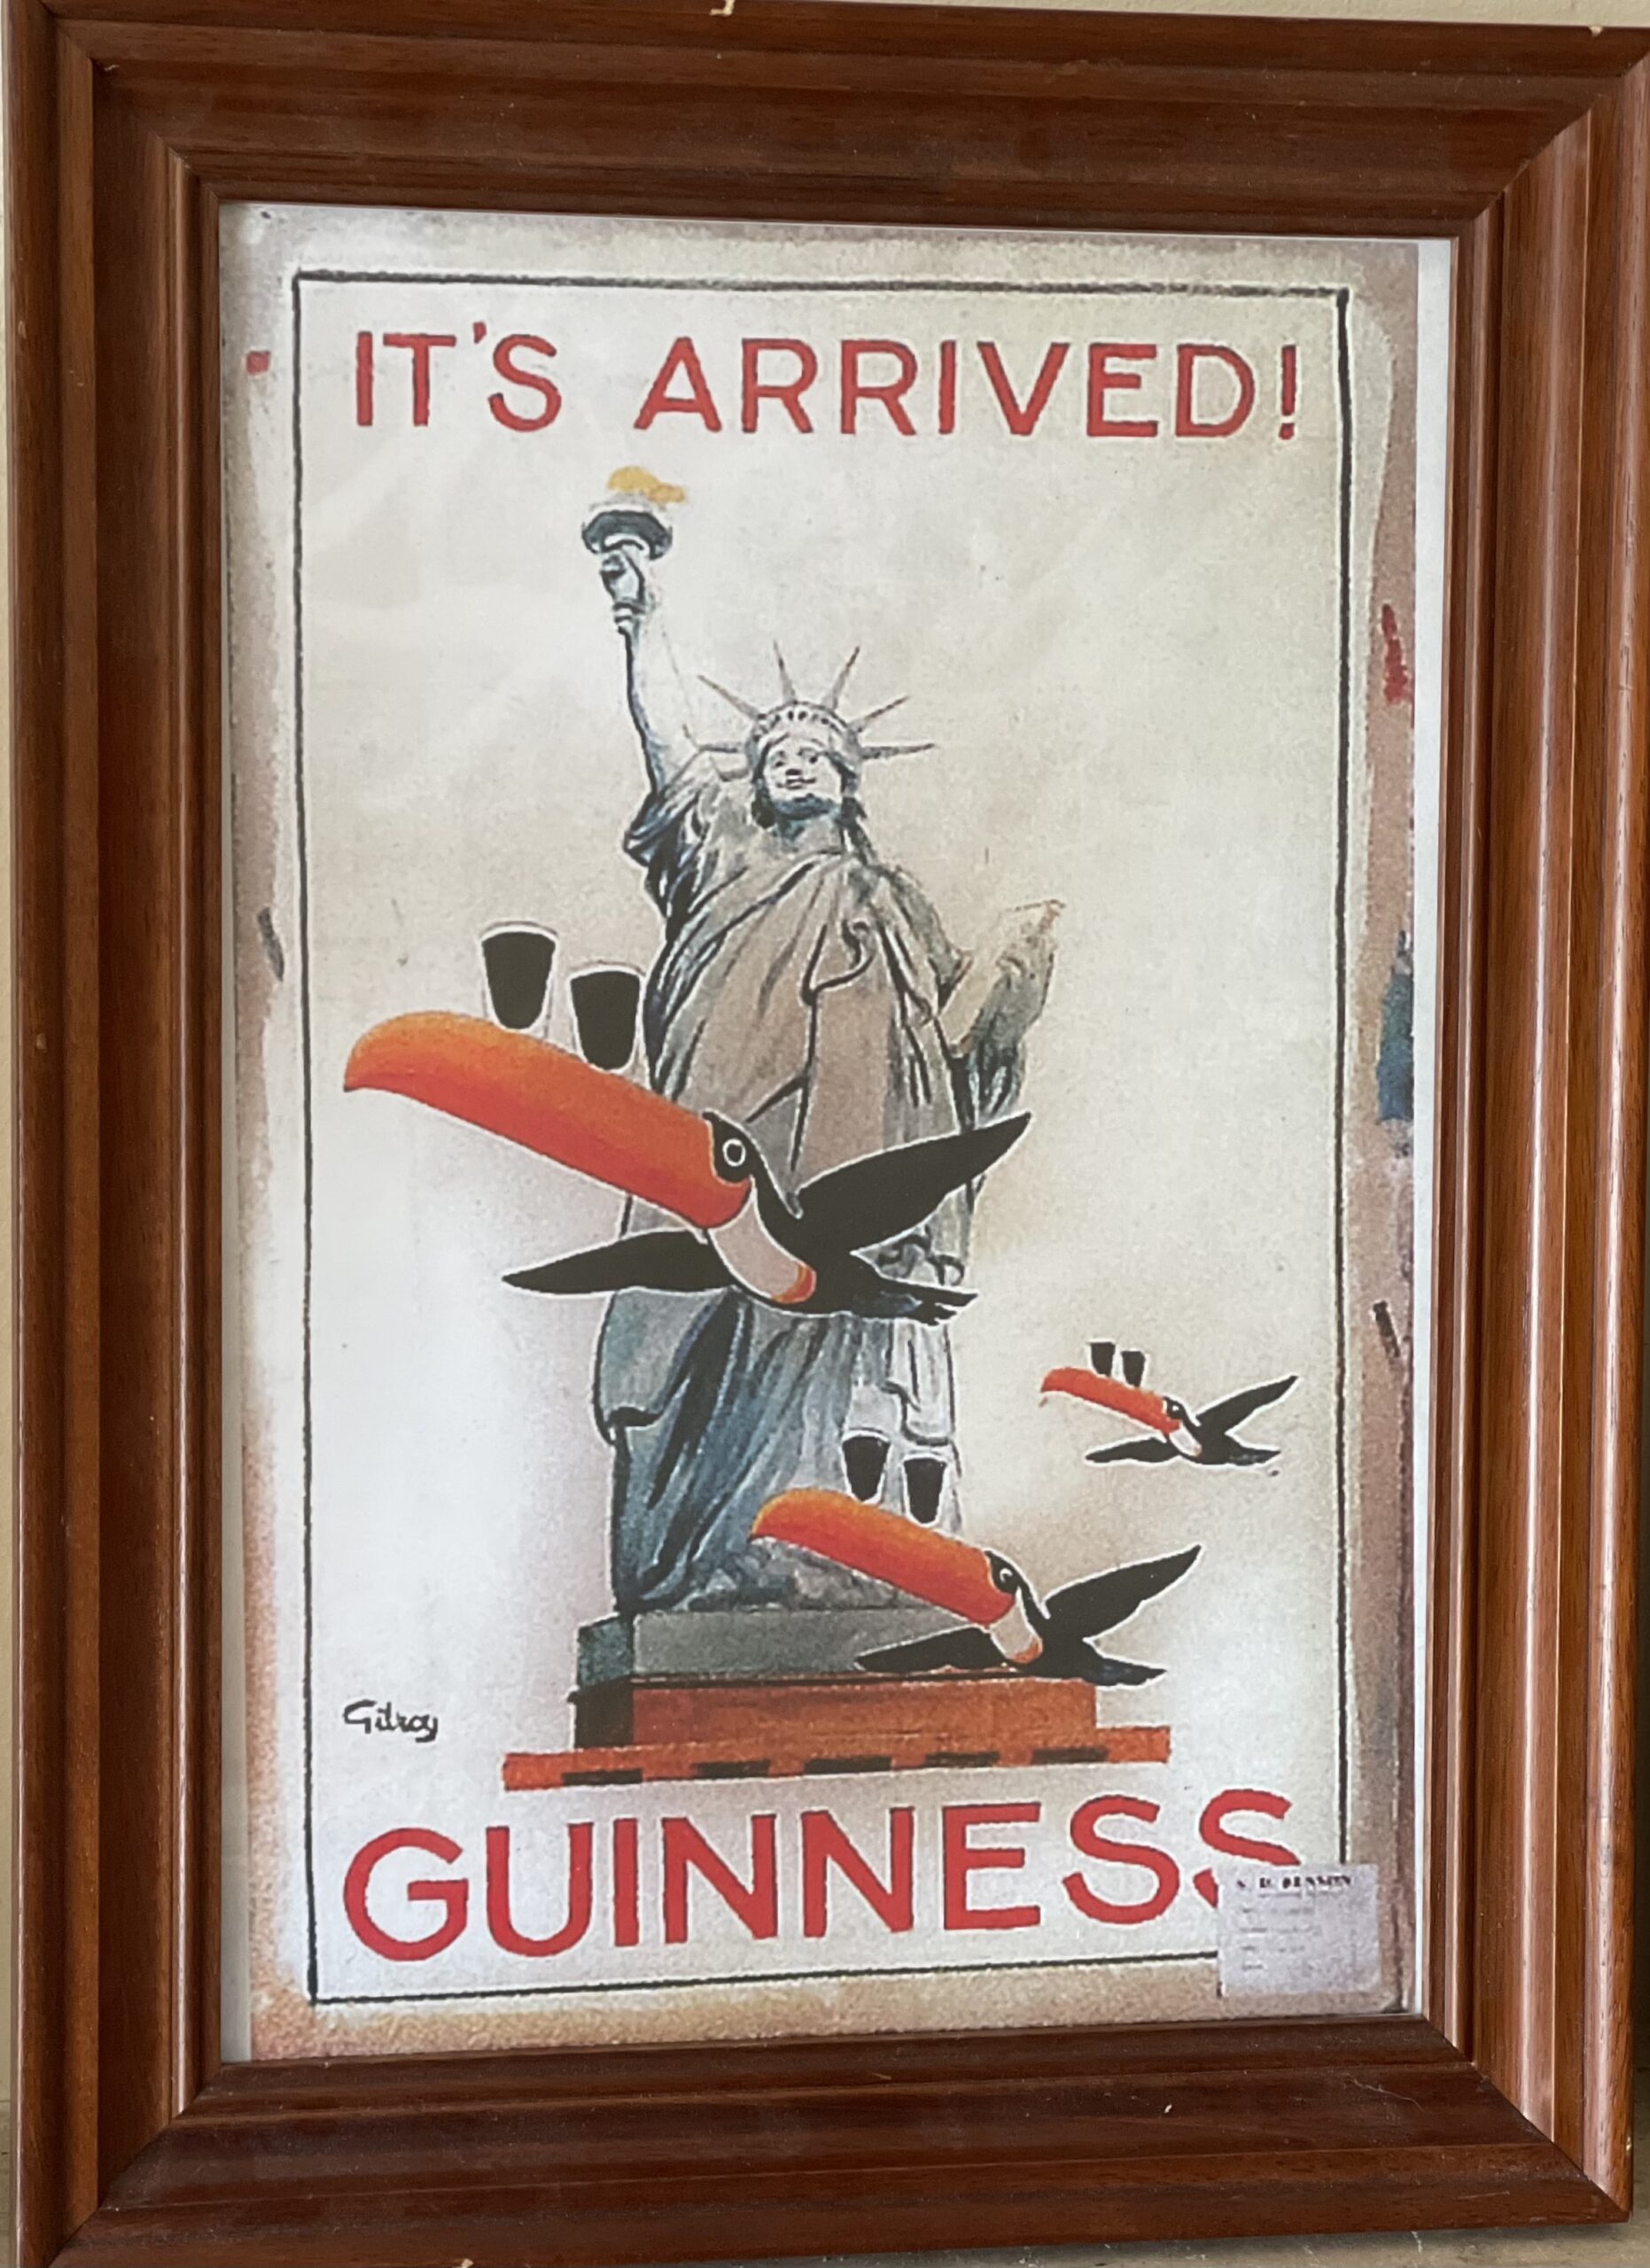 John Gilroy Guinness Lost Archive-Statue of Liberty-Guinness It's